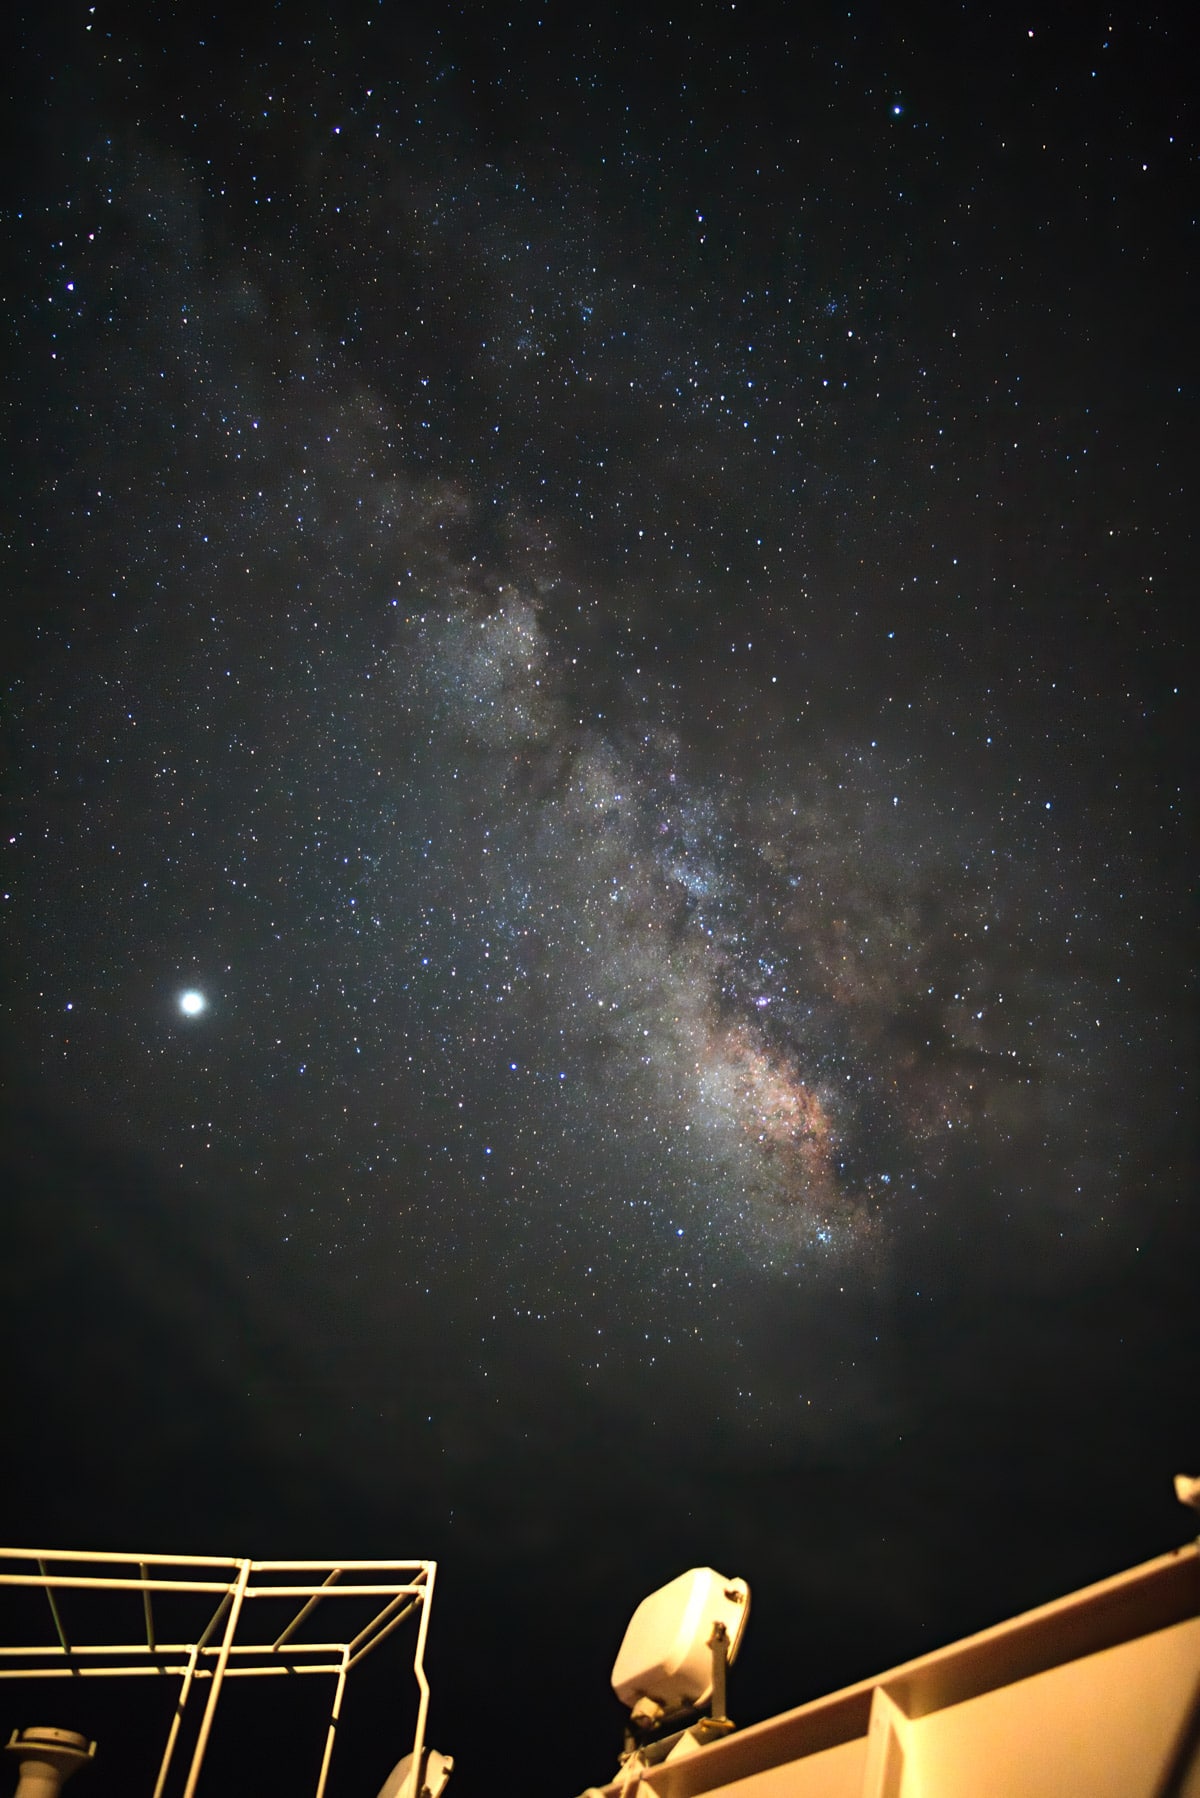 Milky Way from a Cargo Ship by Santiago Olay